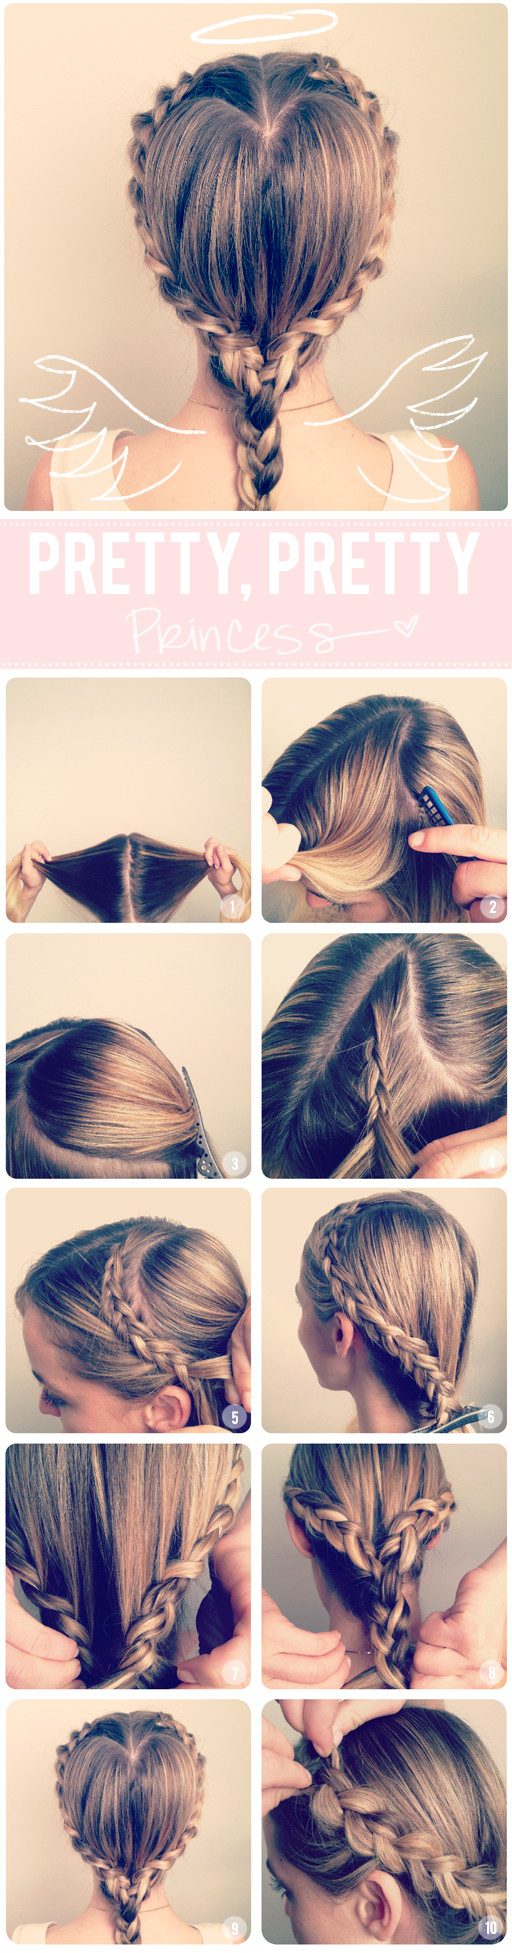 DIY Braid Hair
 11 Interesting And Useful Hair Tutorials For Every Day